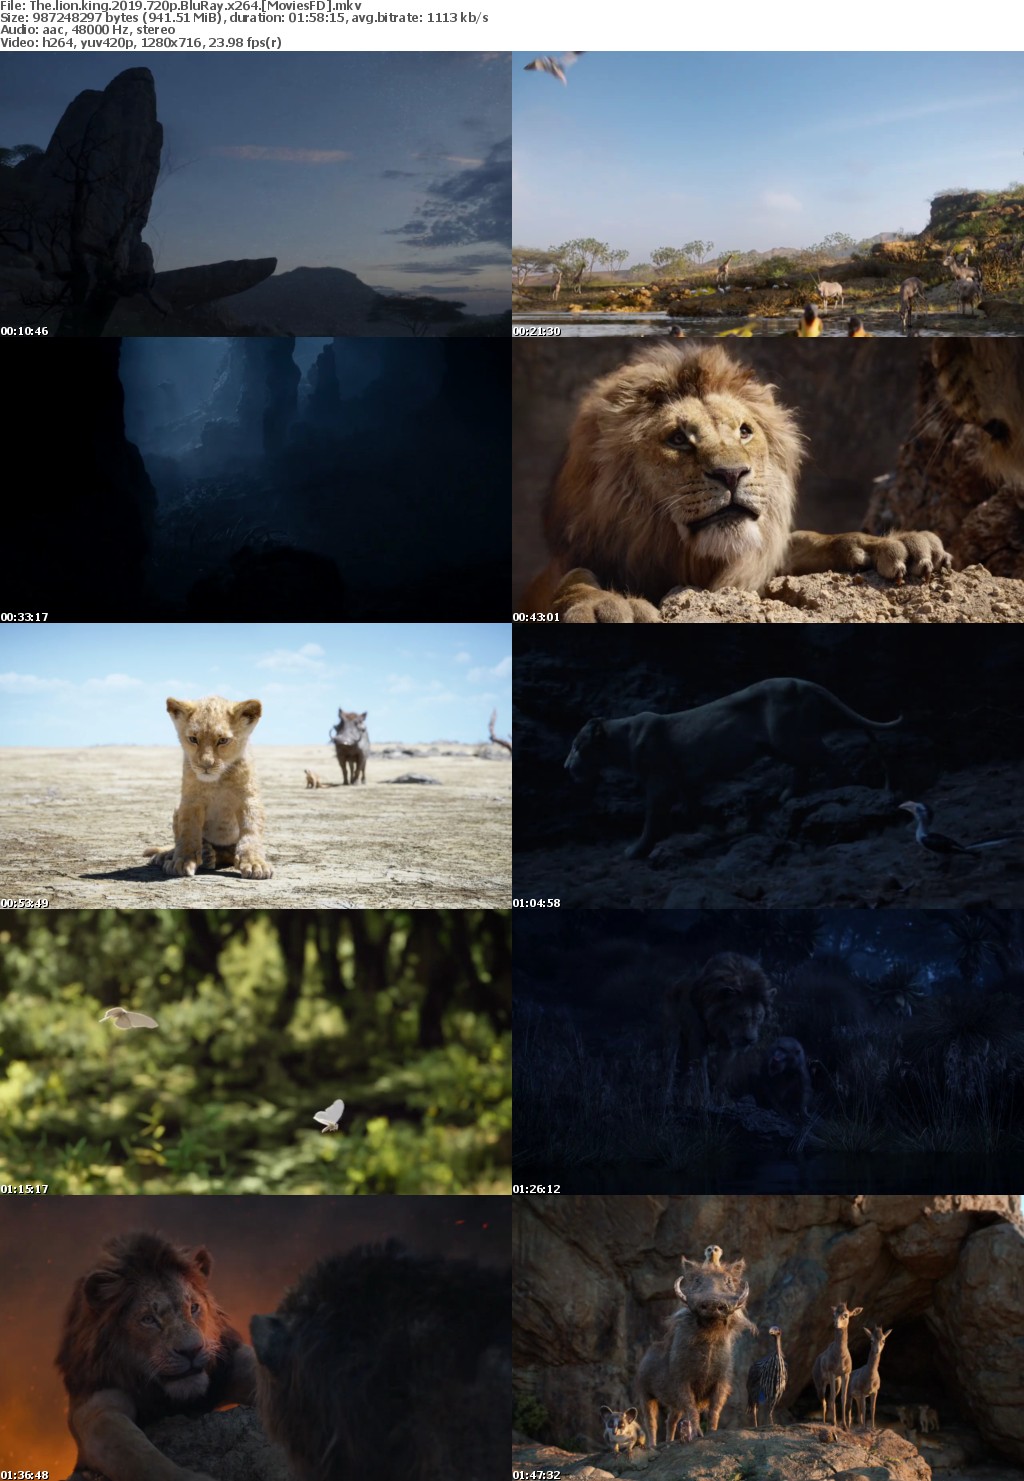 The Lion King (2019) 720p BluRay x264 - MoviesFD